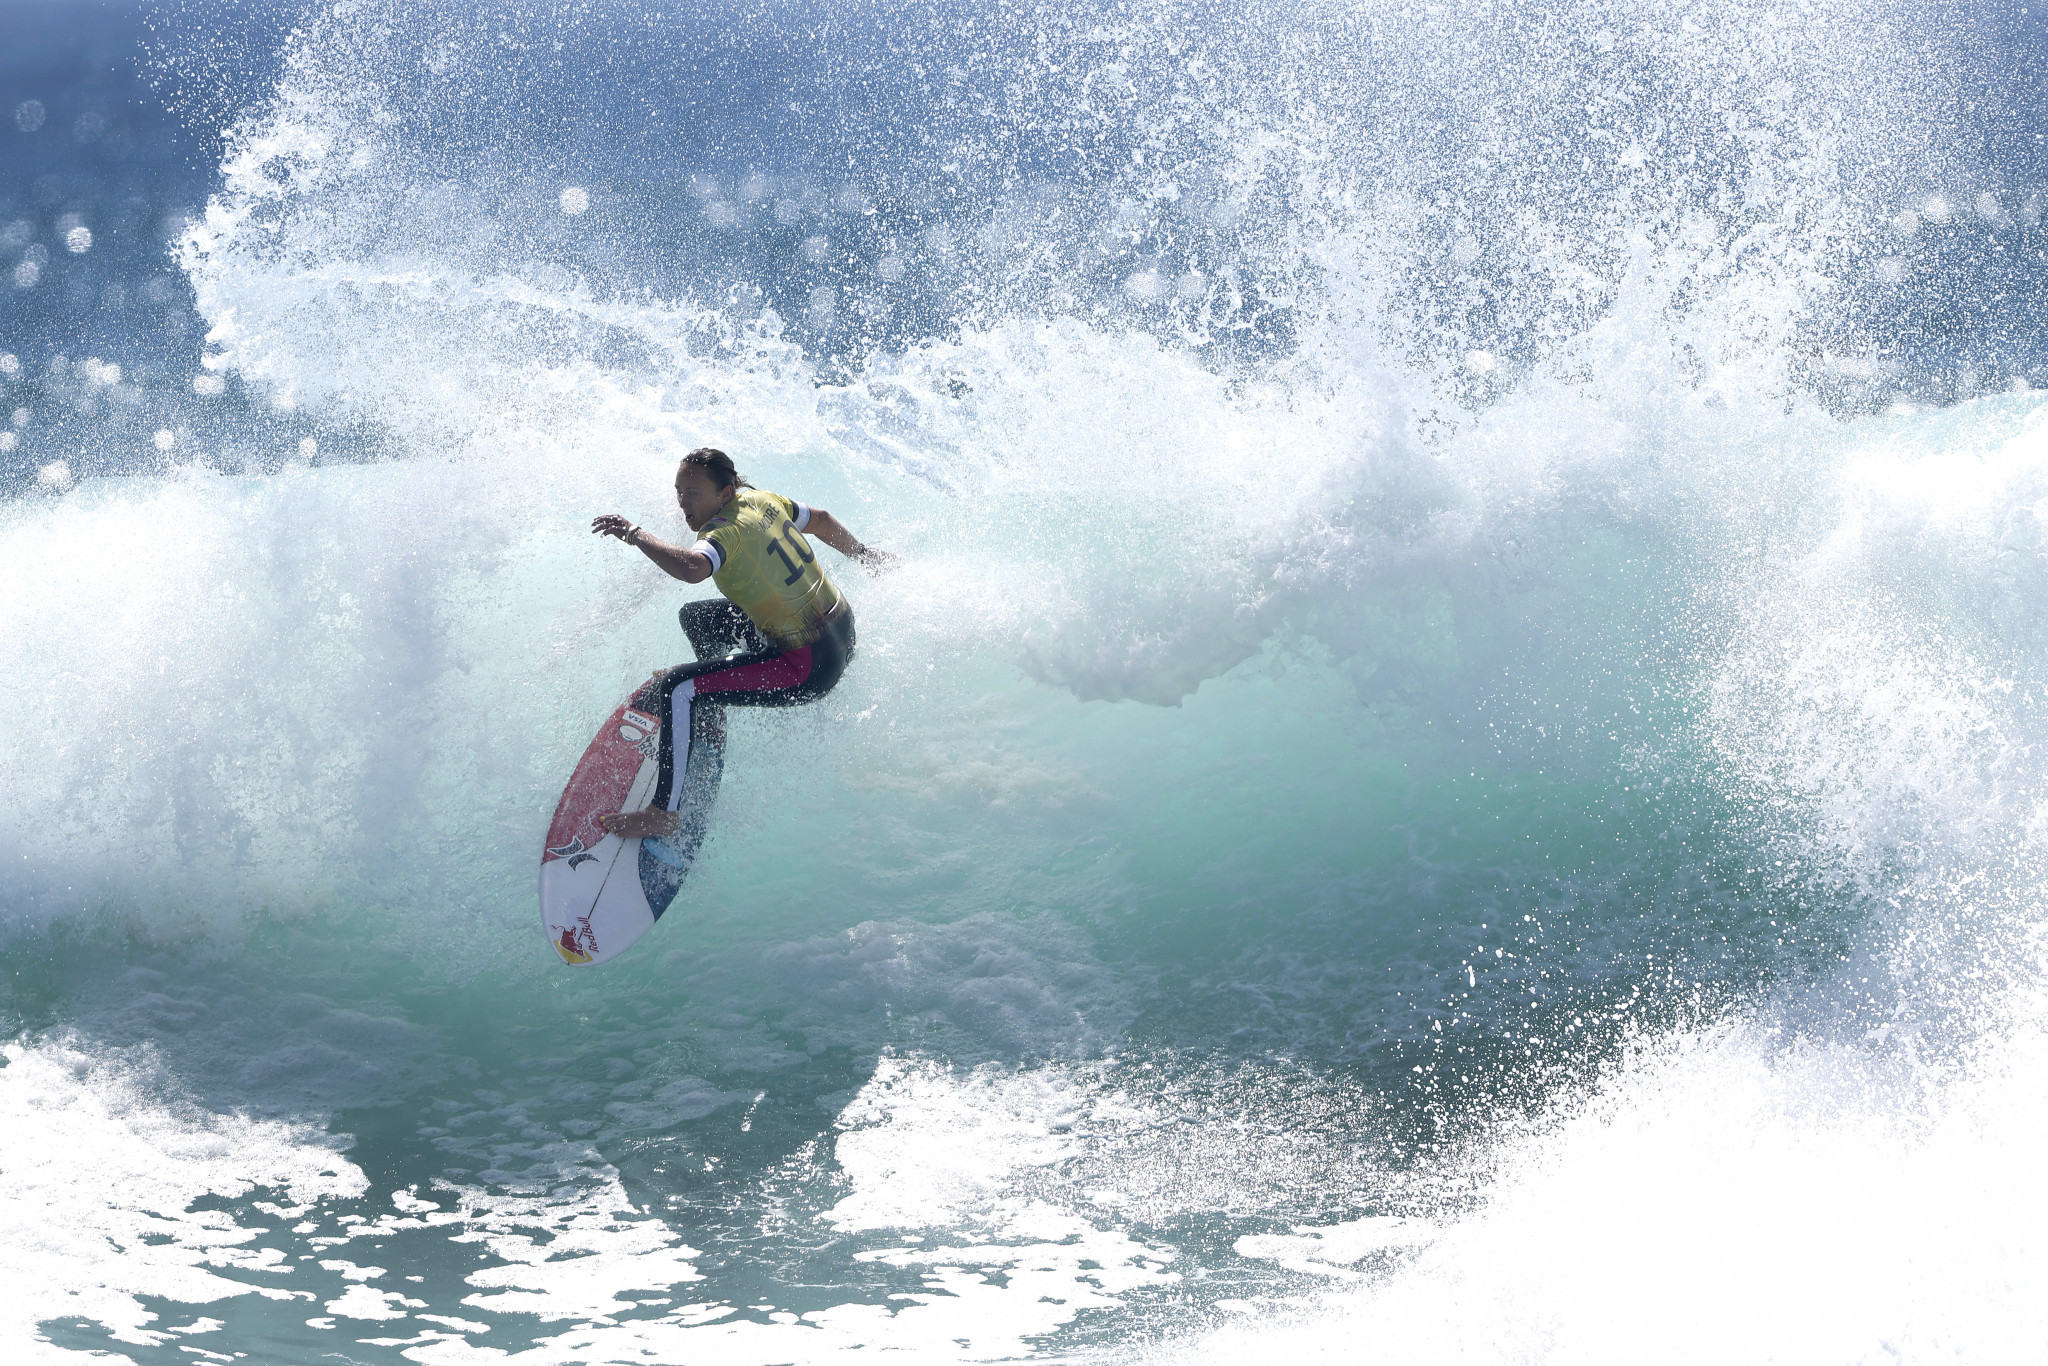 Olympic and WSL champion Moore through to next round at Bells Beach